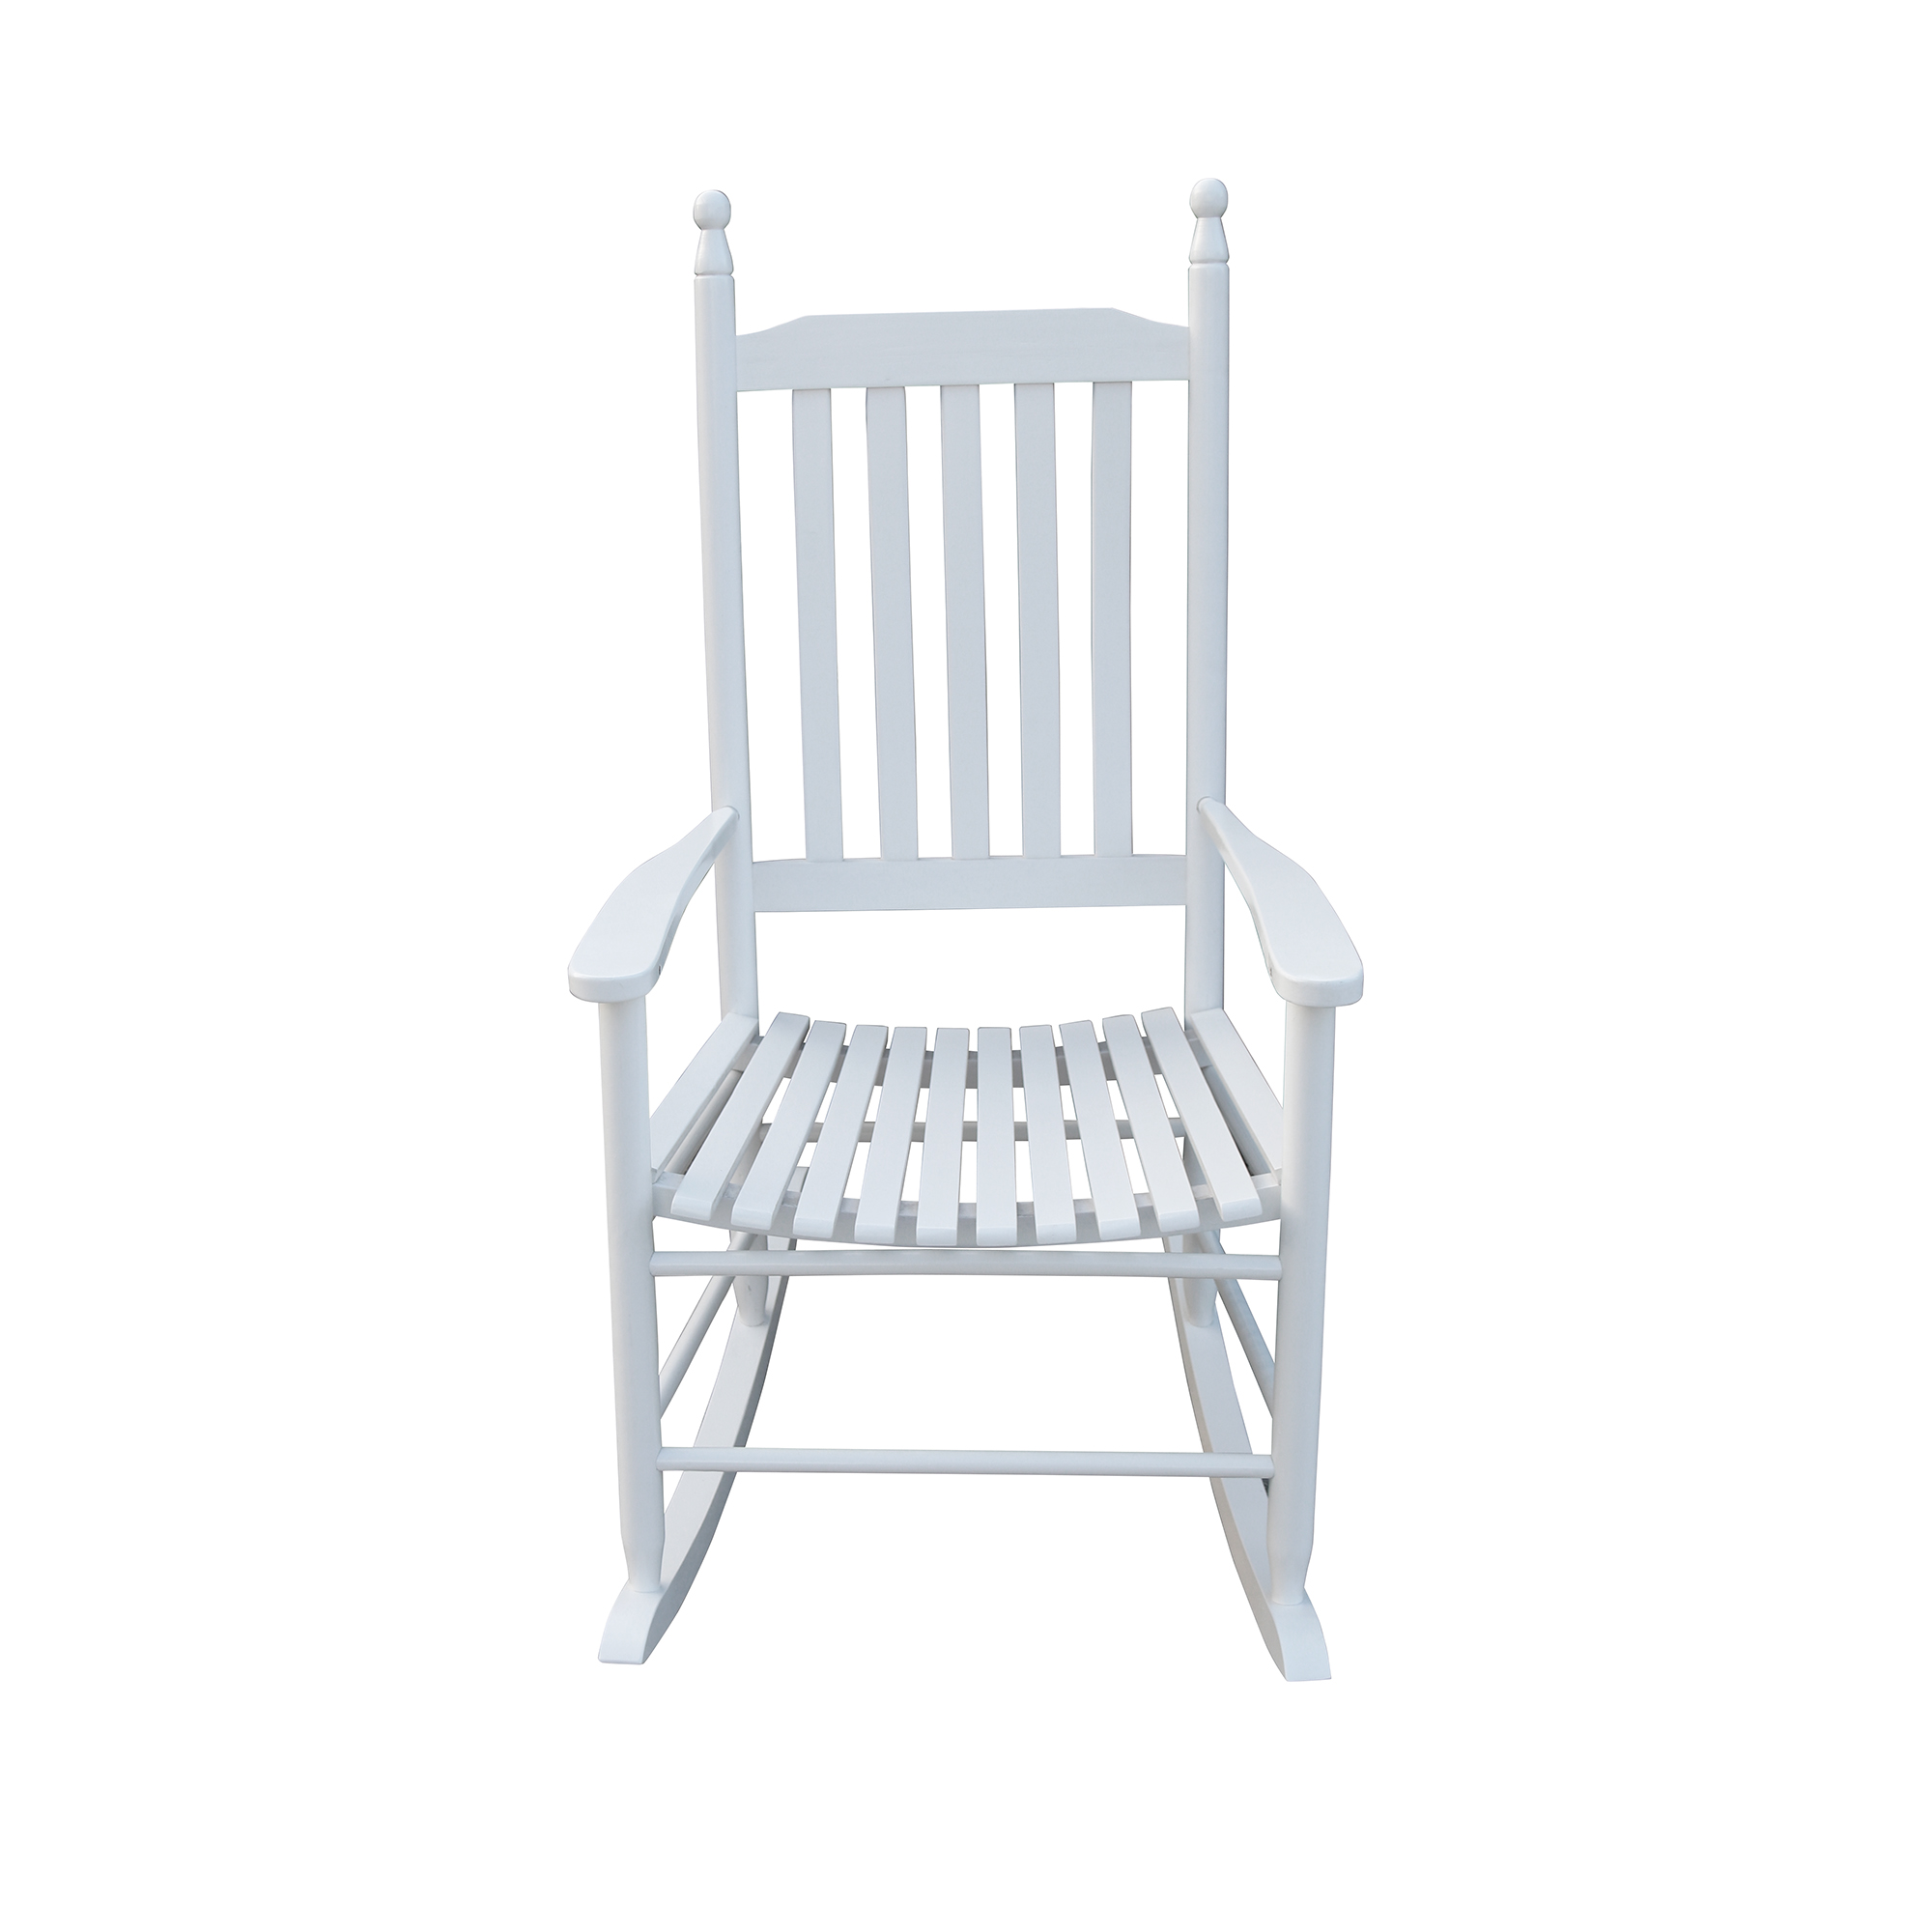 Outdoor Rocking Chair, Wood Rocker Chair for Porch Garden Patio, White24.5" L x 32.85" W x 45.3" H - image 5 of 7